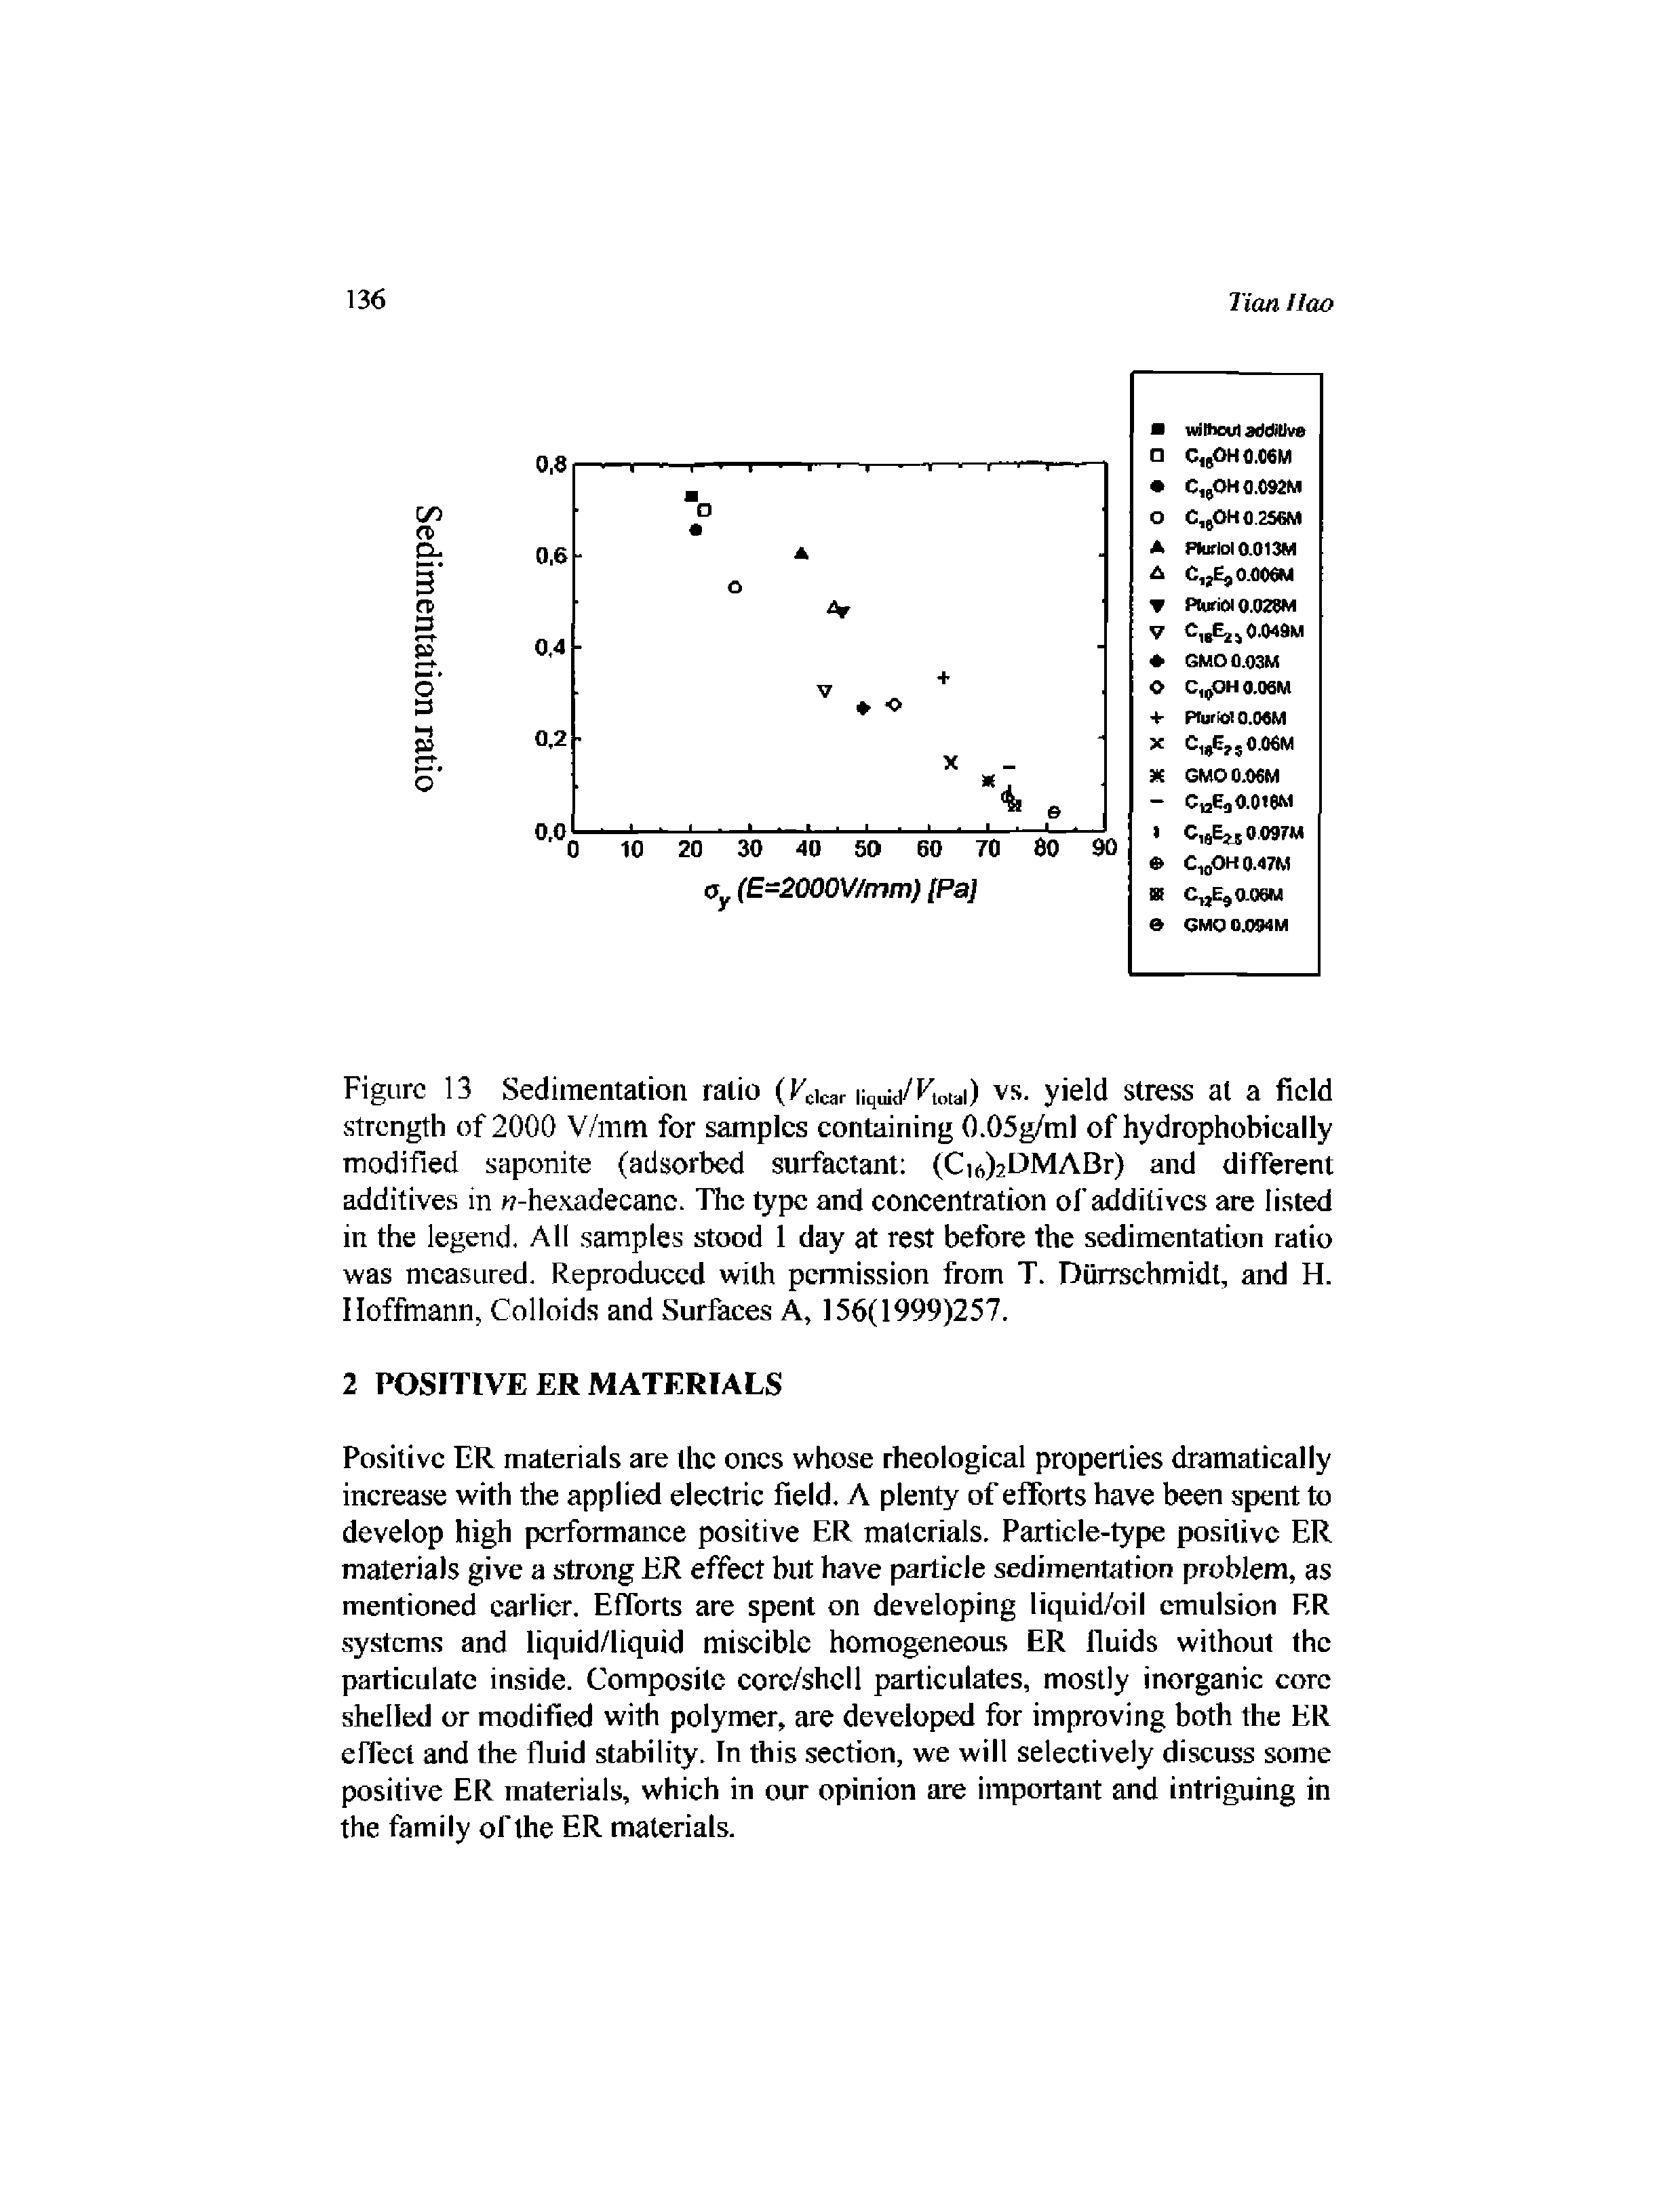 Figure 13 Sedimentation ratio (Fdcar liquid/Fi ,ai) vs. yield stress at a field strength of 2000 V/mm for samples containing 0.05g/ml of hydrophobically modified saponite (adsorbed surfactant (Ci6)2f>MABr) and different additives in 7-hex.adecanc. The type and concentration of additives are listed in the legend. All samples stood 1 day at rest before the sedimentation ratio was measured. Reproduced with permission from T. Diirrschmidt, and H. Hoffmann, Colloids and Surfaces A, 156(1999)257.